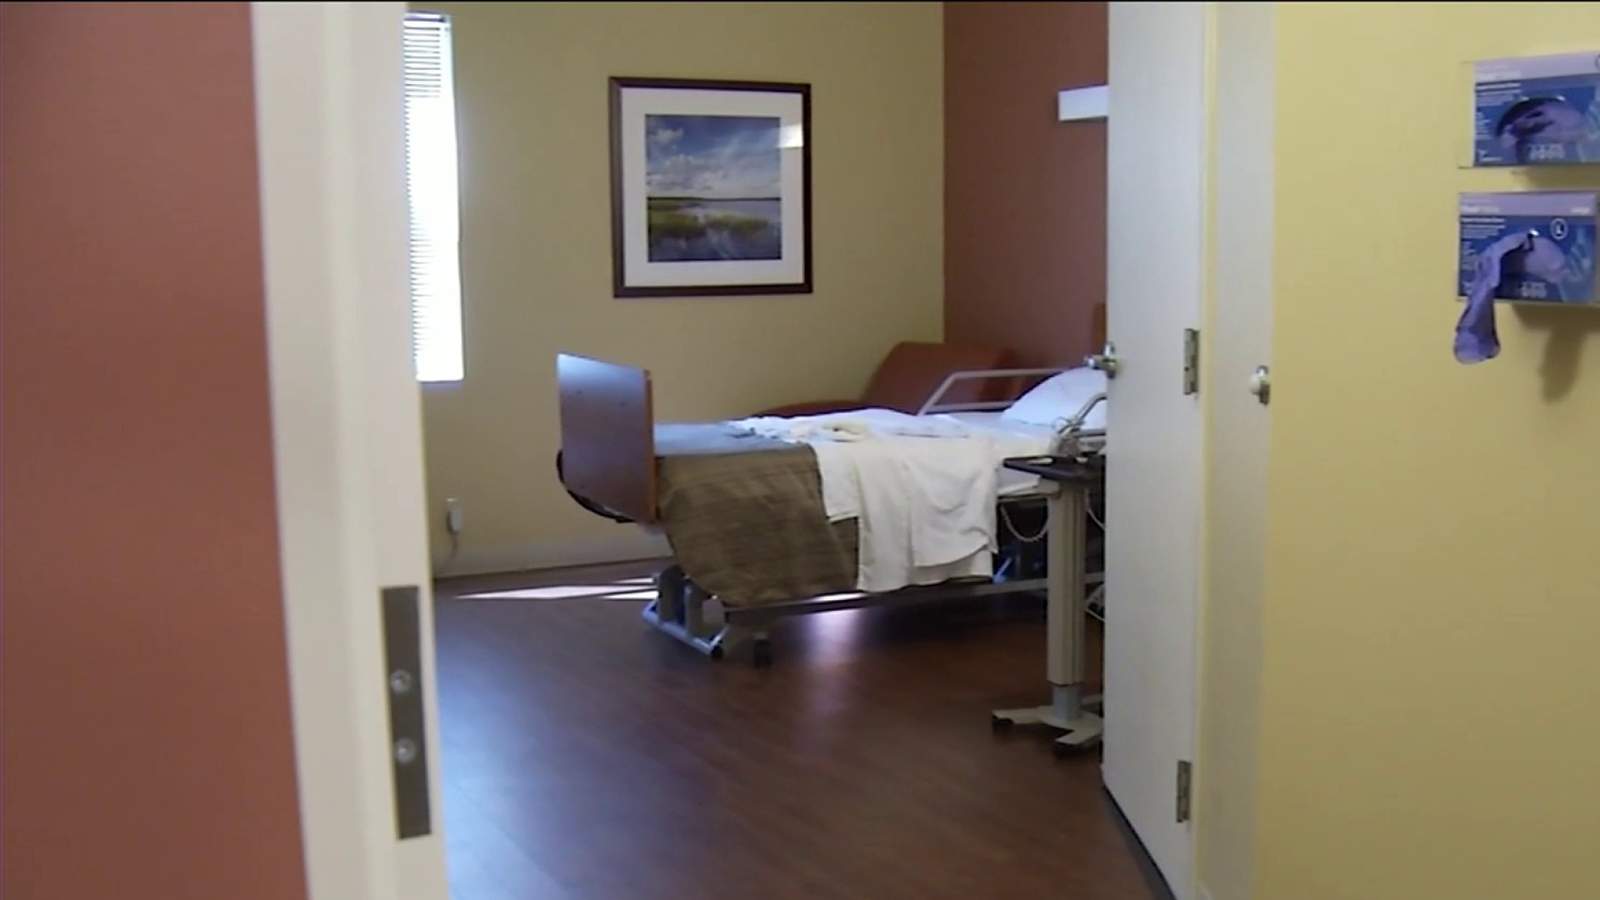 COVID-19 deaths of Florida long-term care residents, staff surpass 8,000